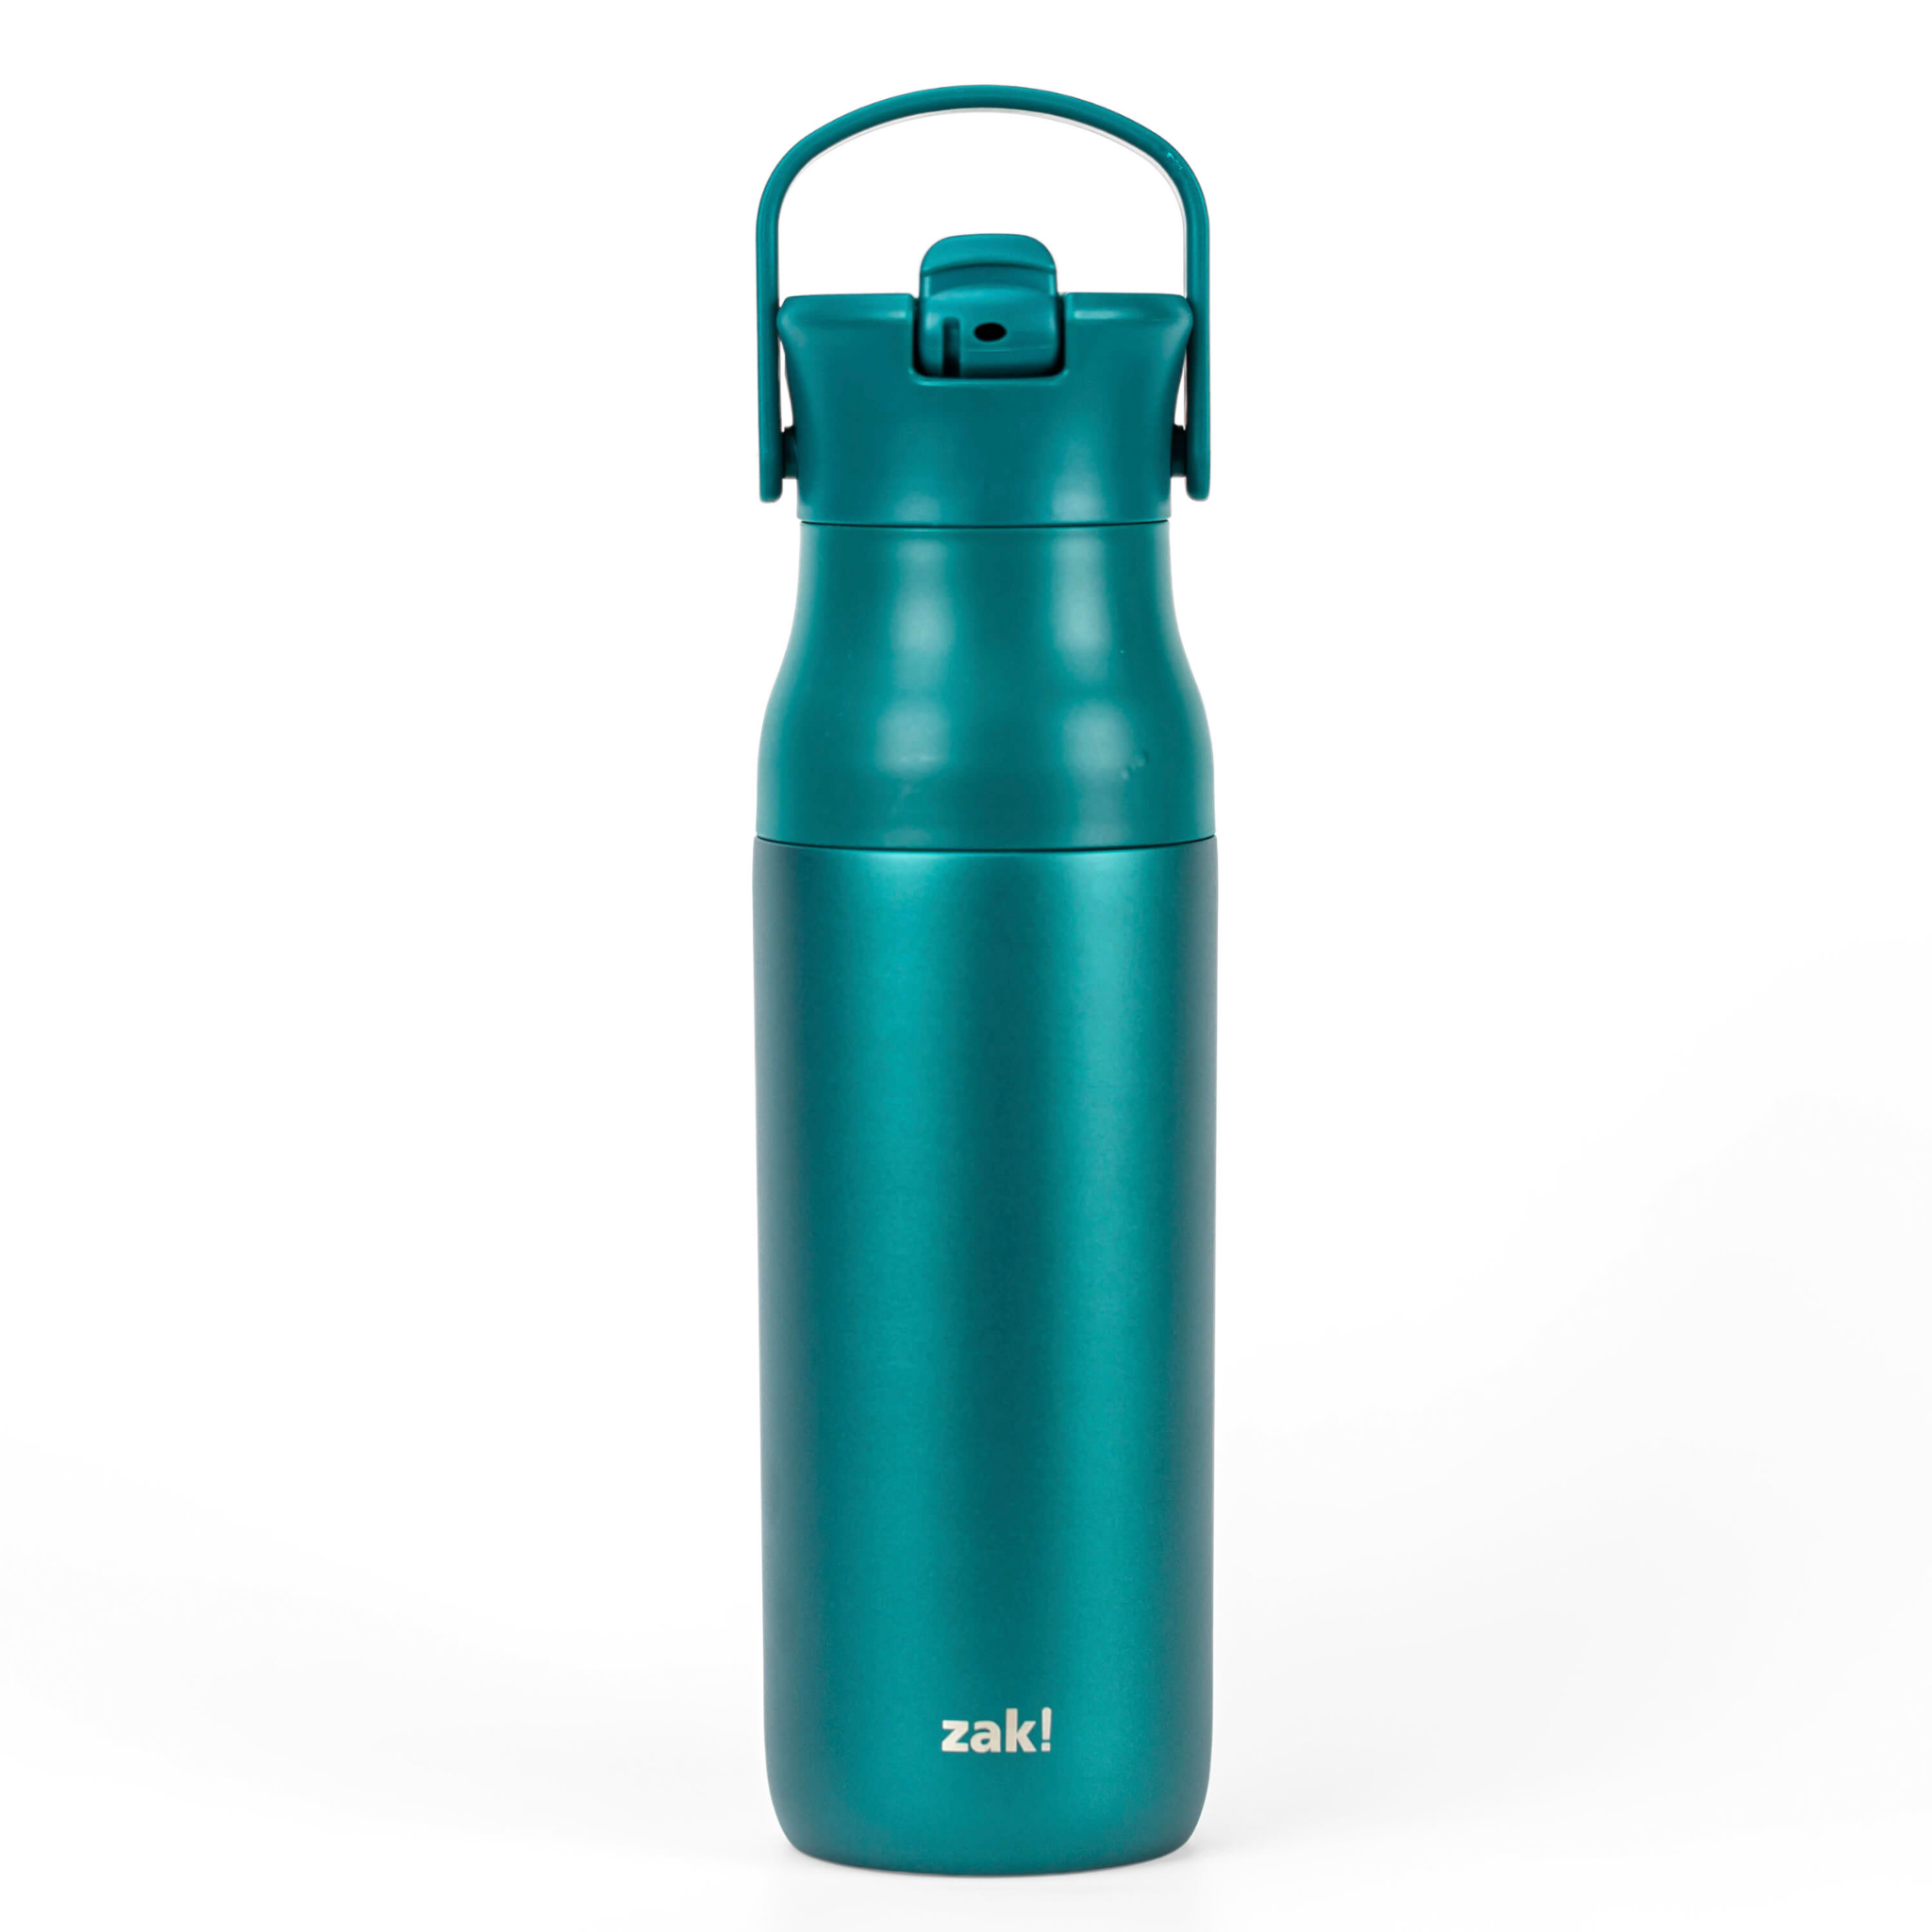 Zak Designs Liberty 20oz Stainless Steel Double Wall Insulated Water Bottle  with Leak-Proof Design, BPA Free Reusable, Convenient carry handle for